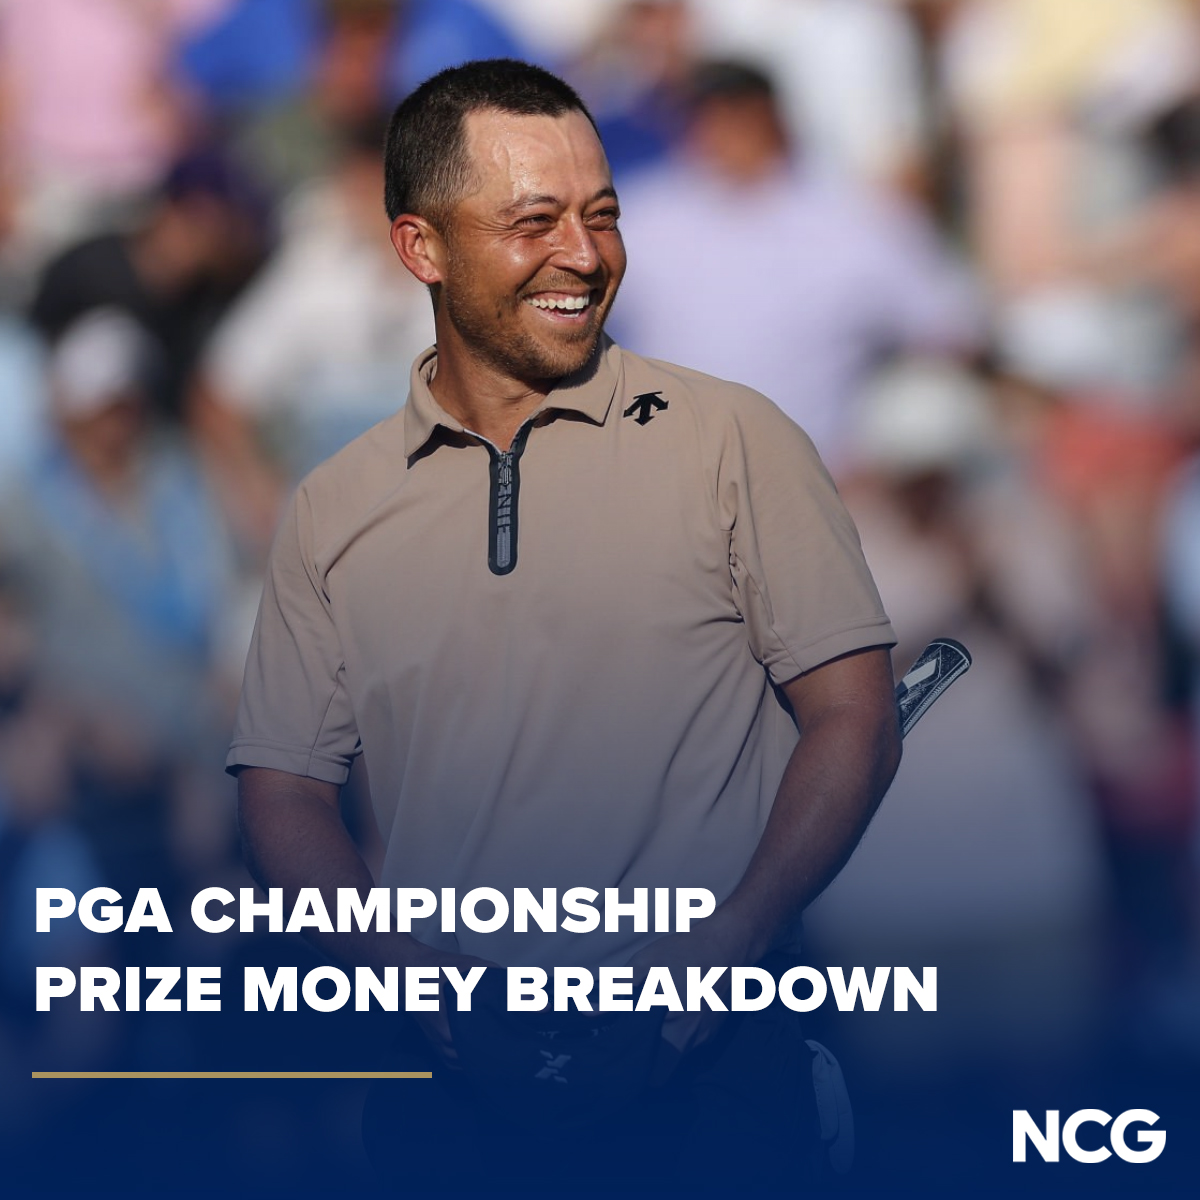 Xander Schauffele received a record-breaking PGA Championship winner's share for his victory 💰 🔗 ow.ly/S3iH50RMIIc